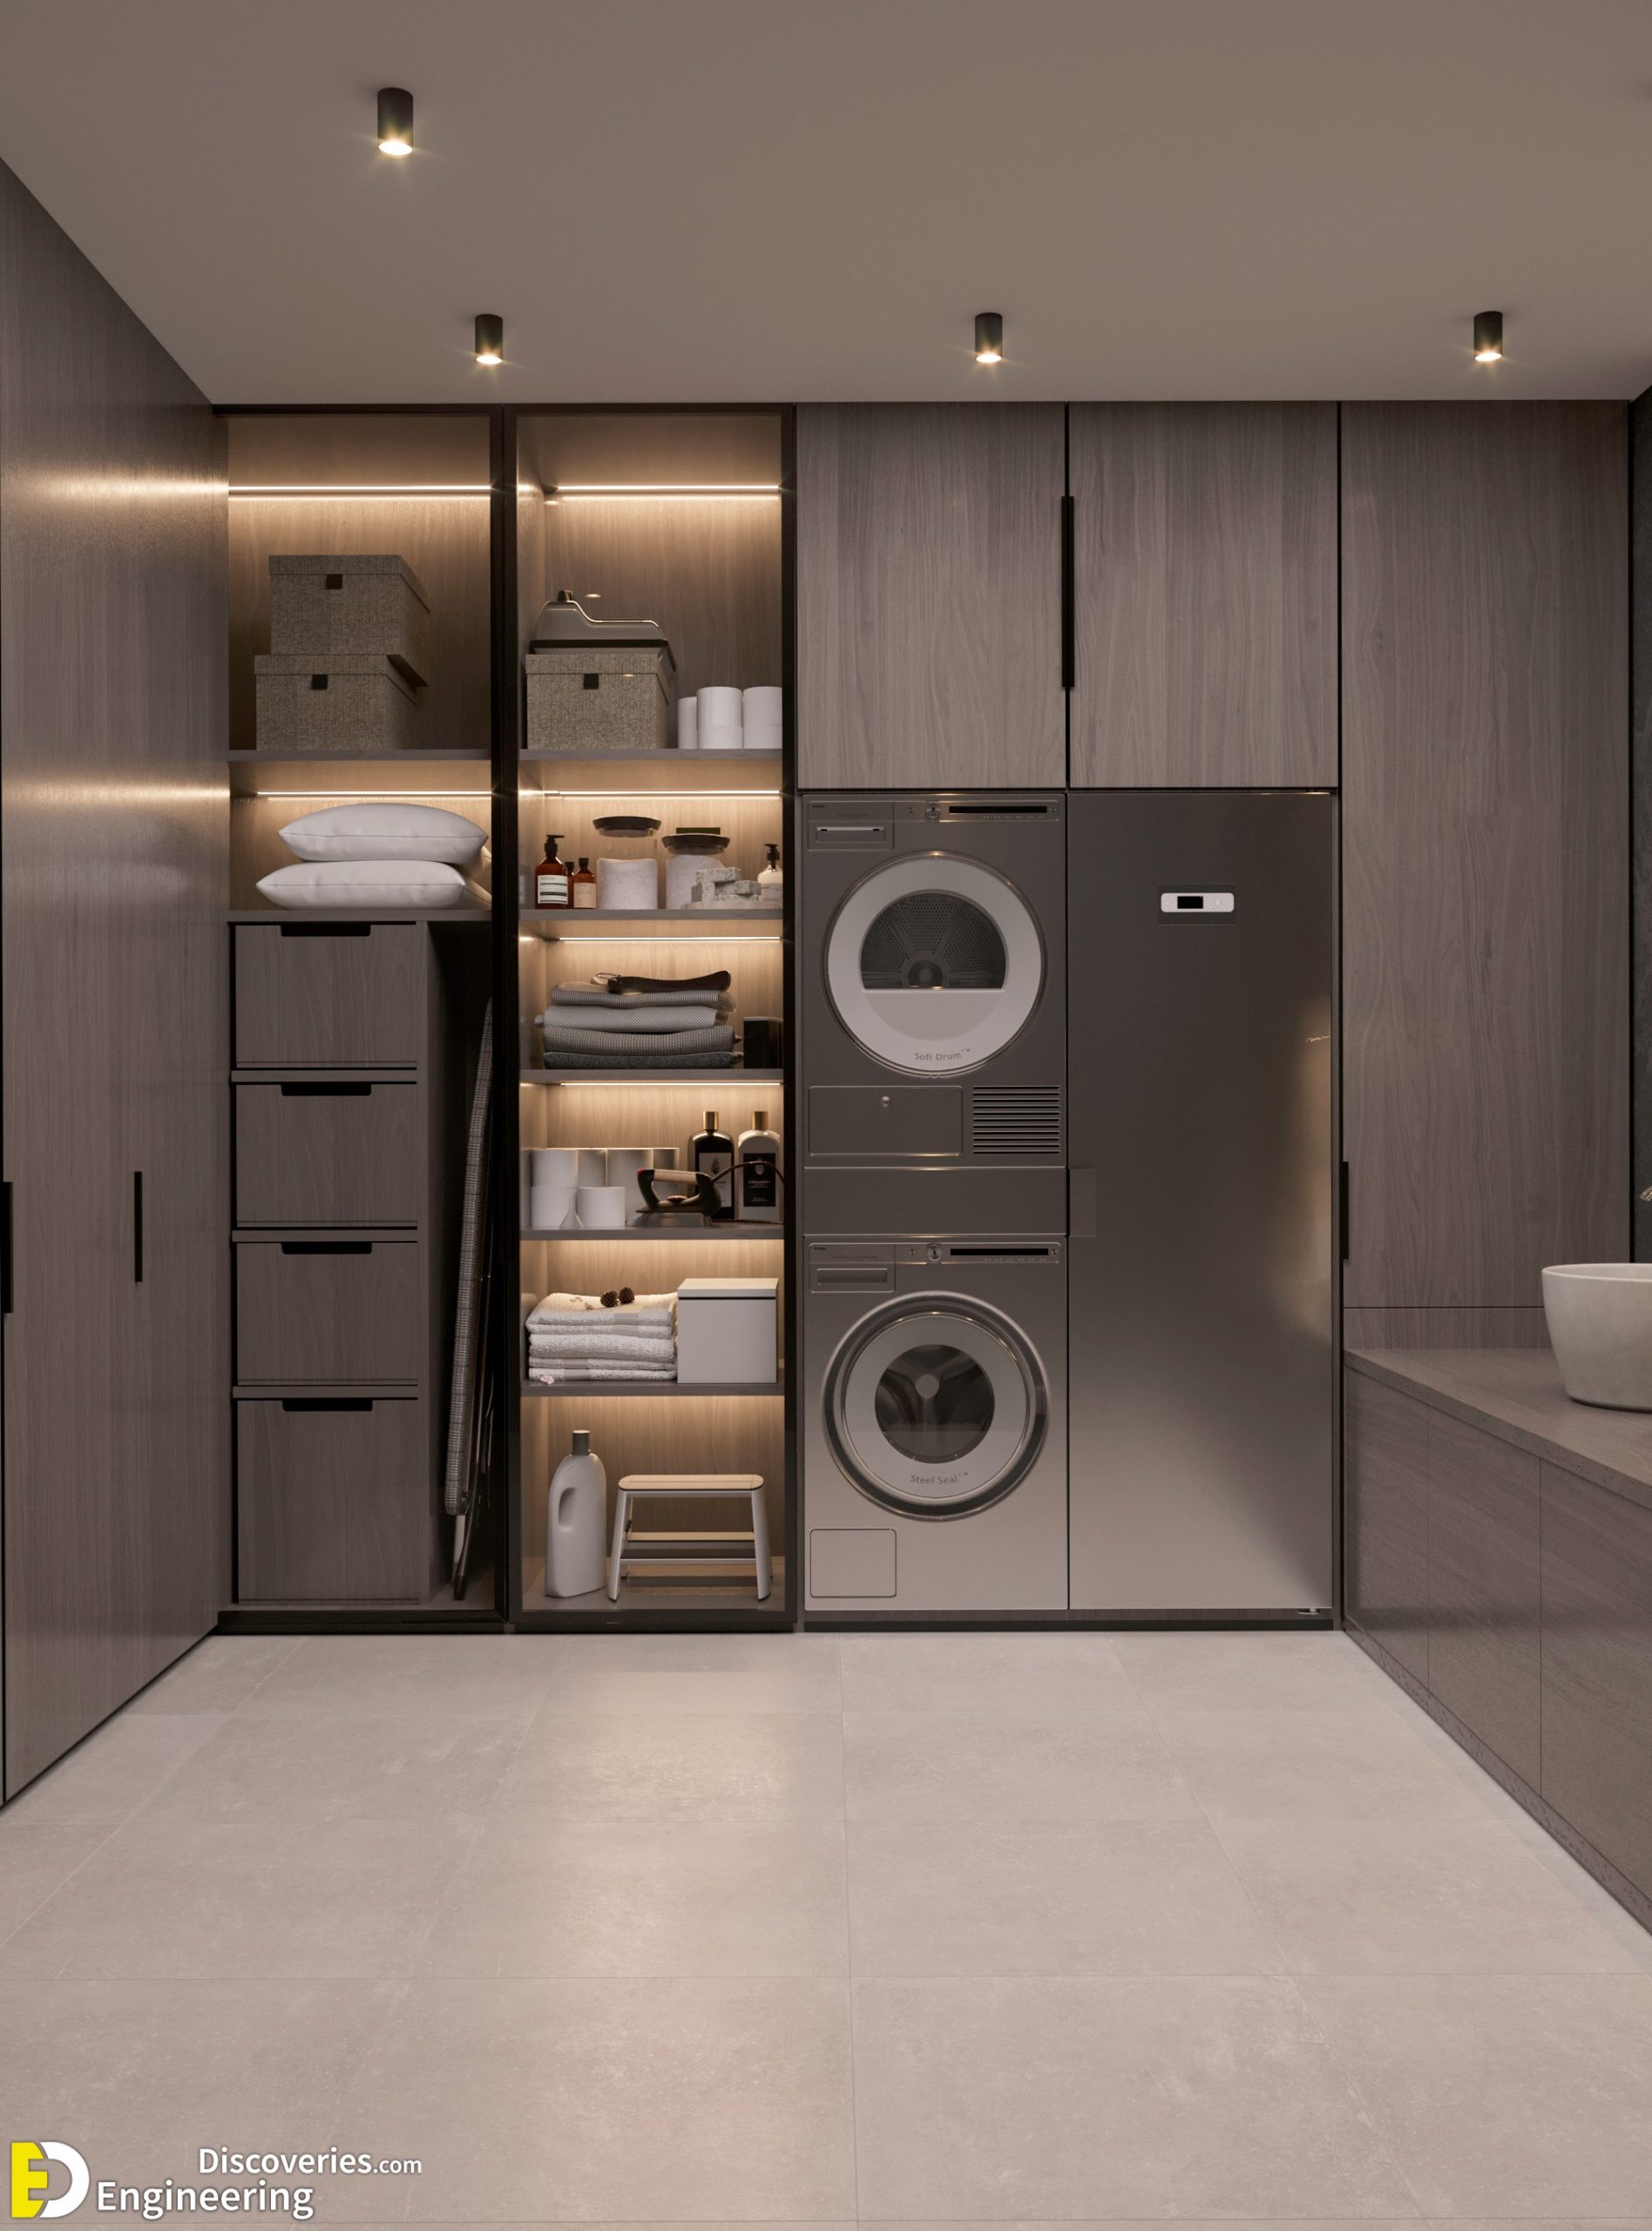 https://engineeringdiscoveries.com/wp-content/uploads/2023/12/26-engineering-discoveries-36-small-laundry-room-ideas-that-maximize-space-and-style-scaled.jpg